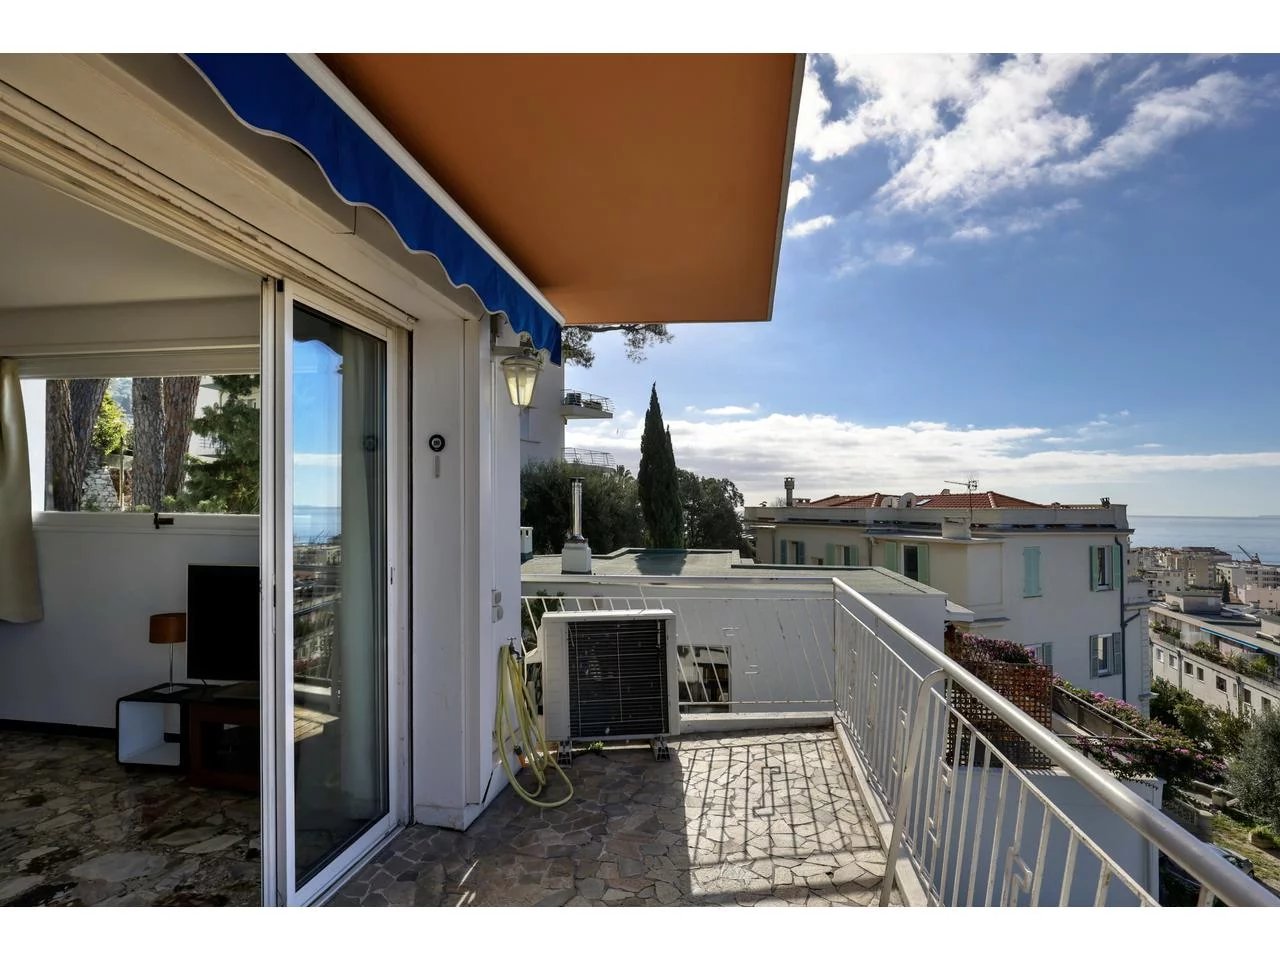 Appartement  3 Rooms 70m2  for sale   680 000 €